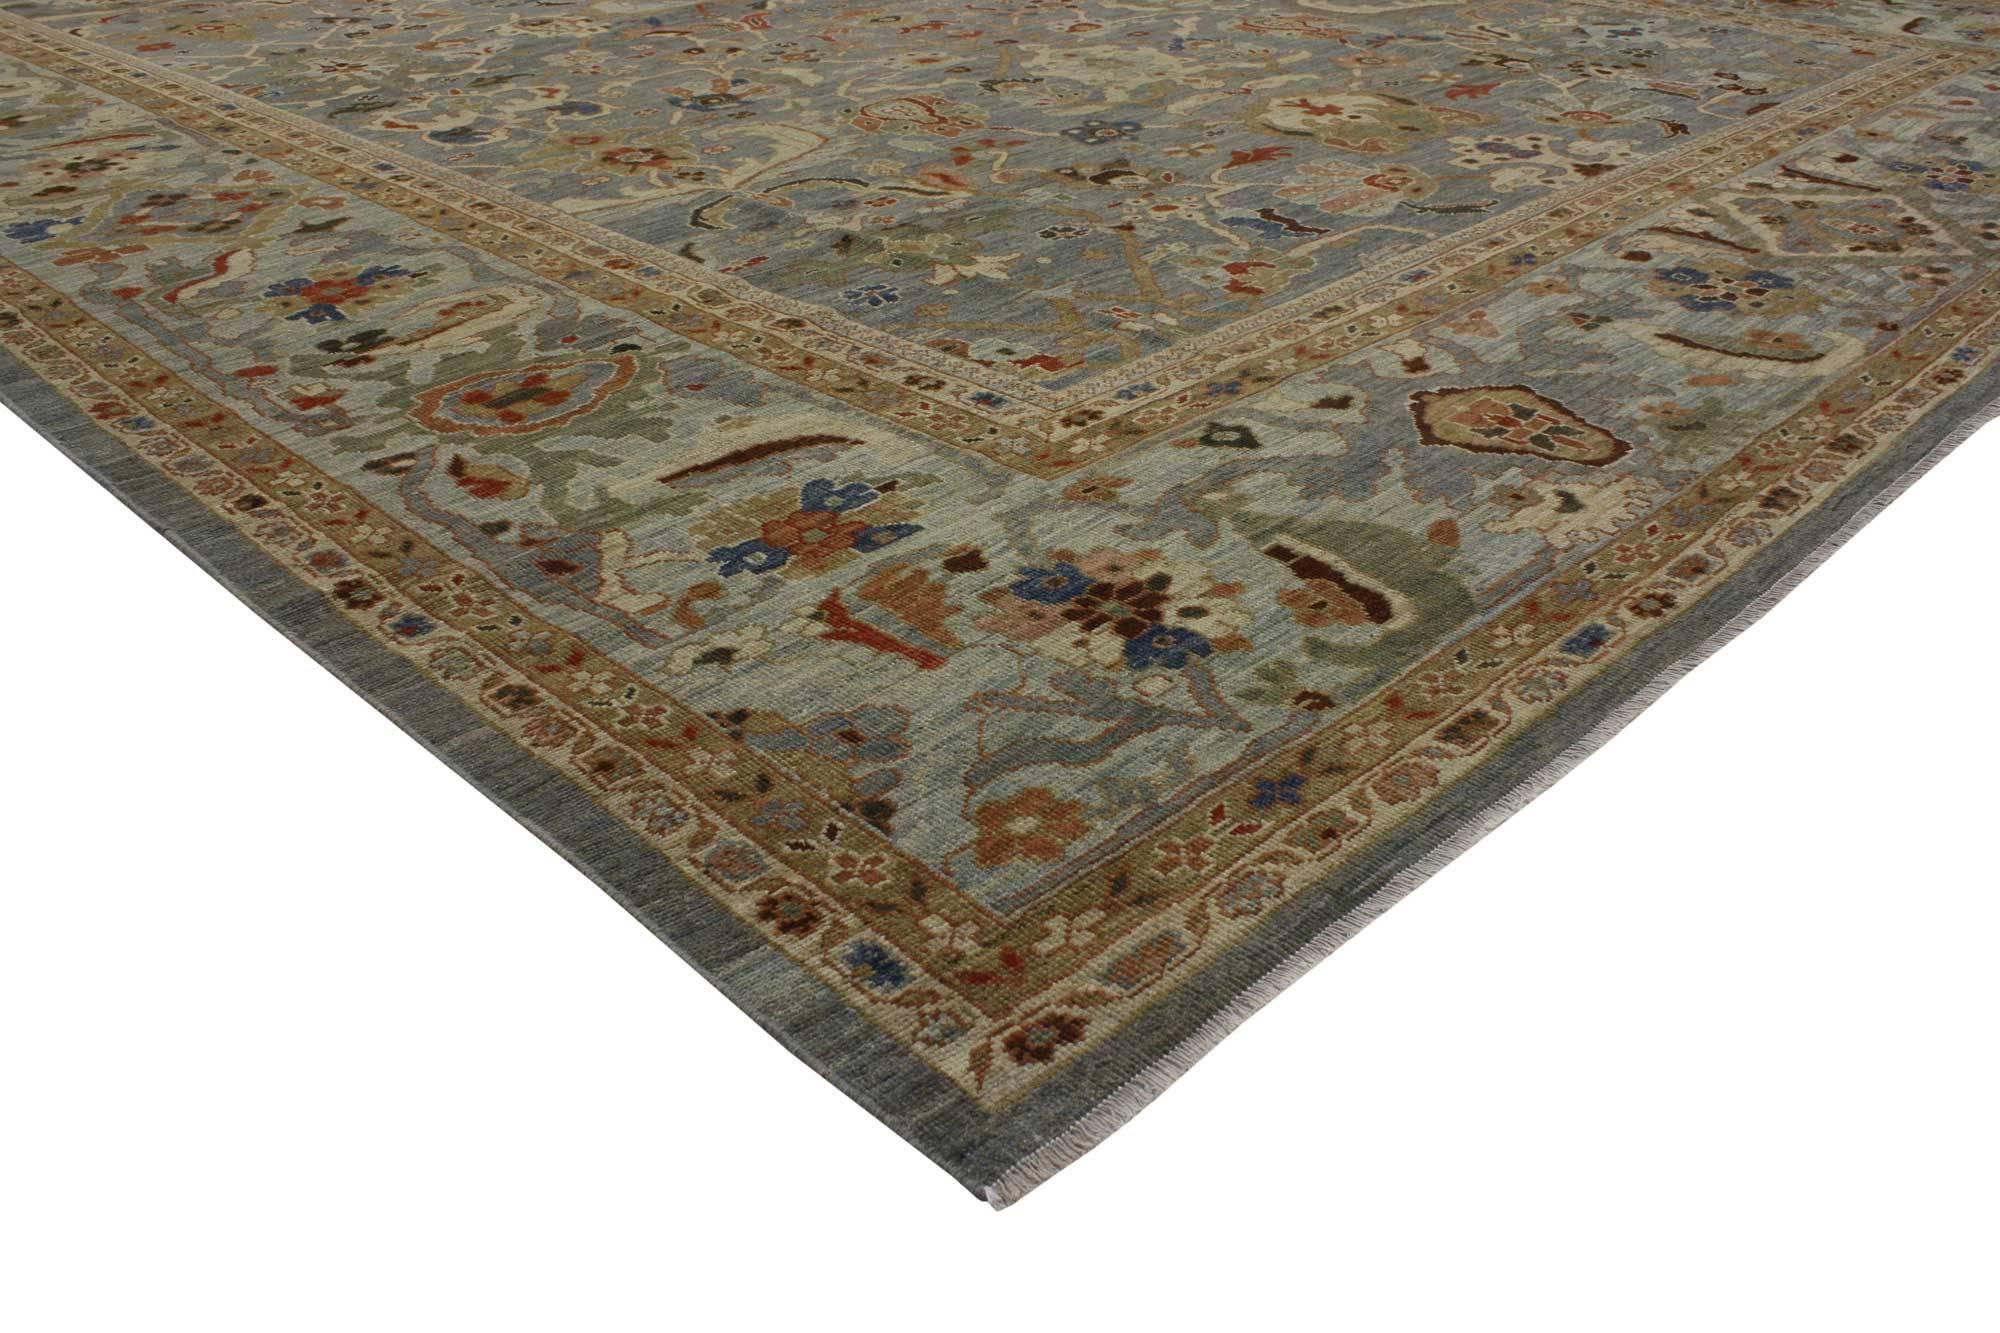 Set off with stylish levels of complexity and its highly decorative aesthetic, this contemporary Persian Sultanabad rug features a traditional modern style and vibrant colors. Displaying a combination of exquisitely balanced designs and rich waves